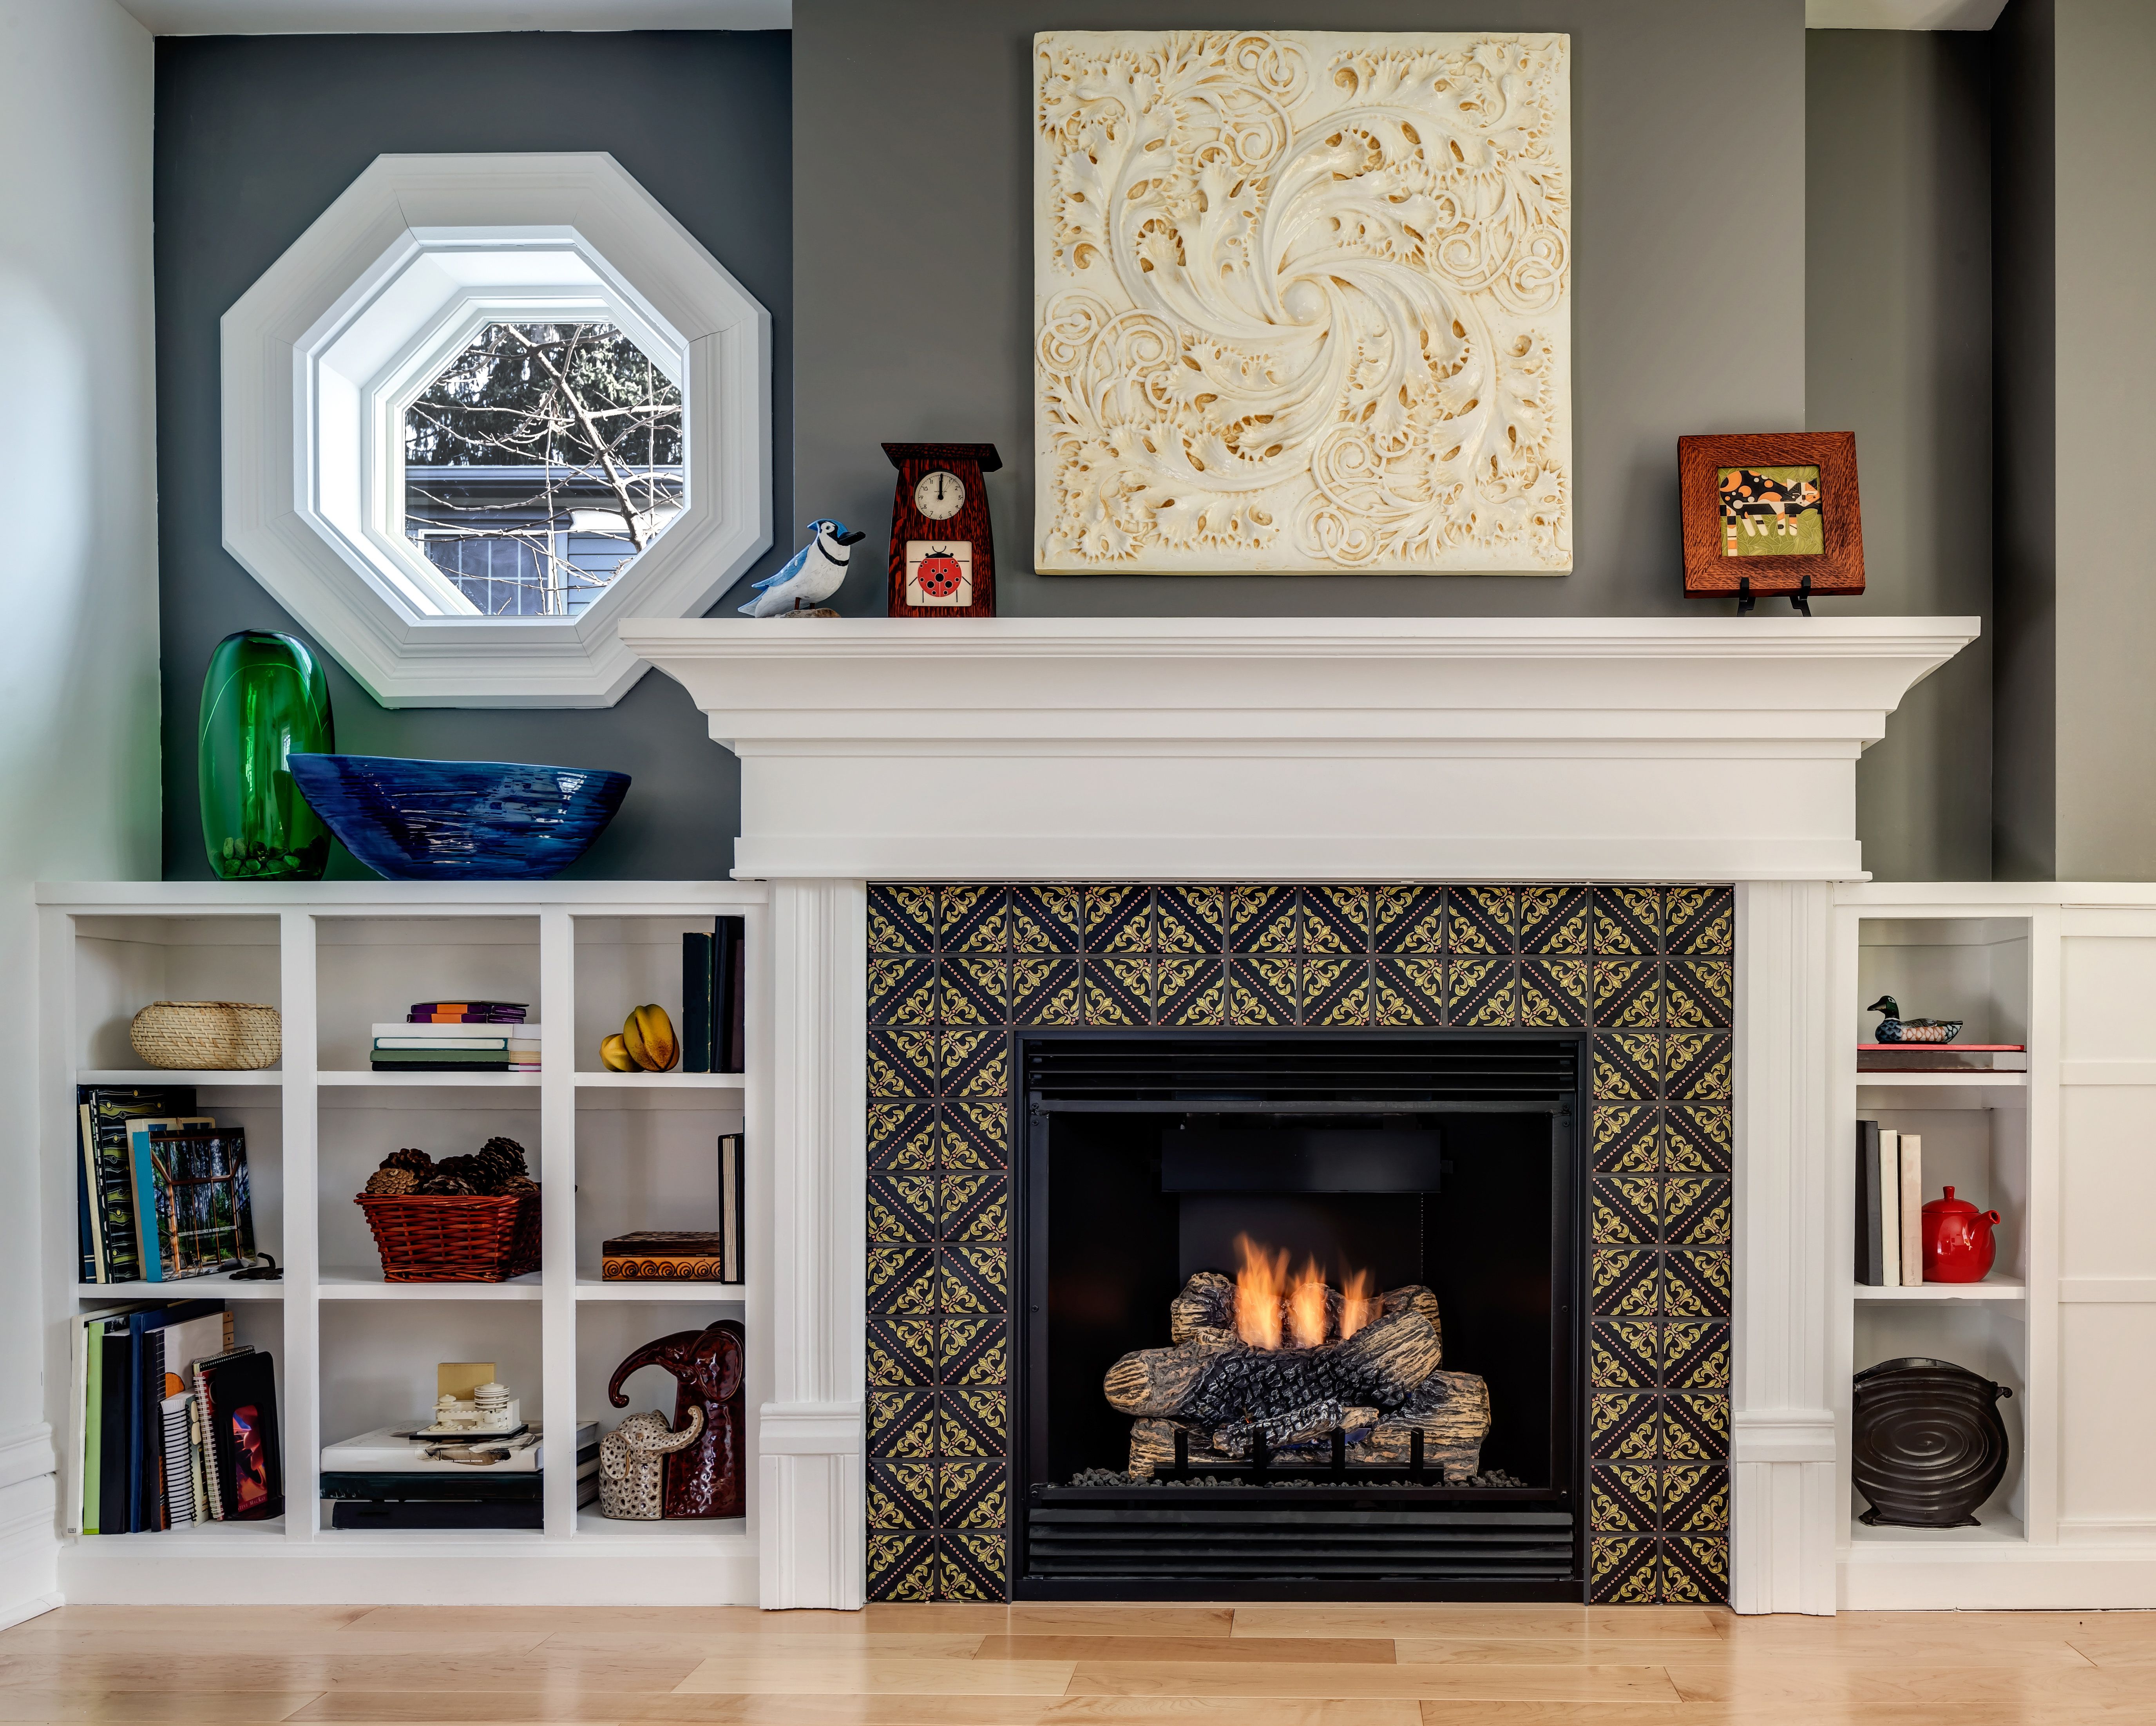 Tile Fireplace Designs Photos Lovely This Small but Stylish Fireplace Features Our Lisbon Tile